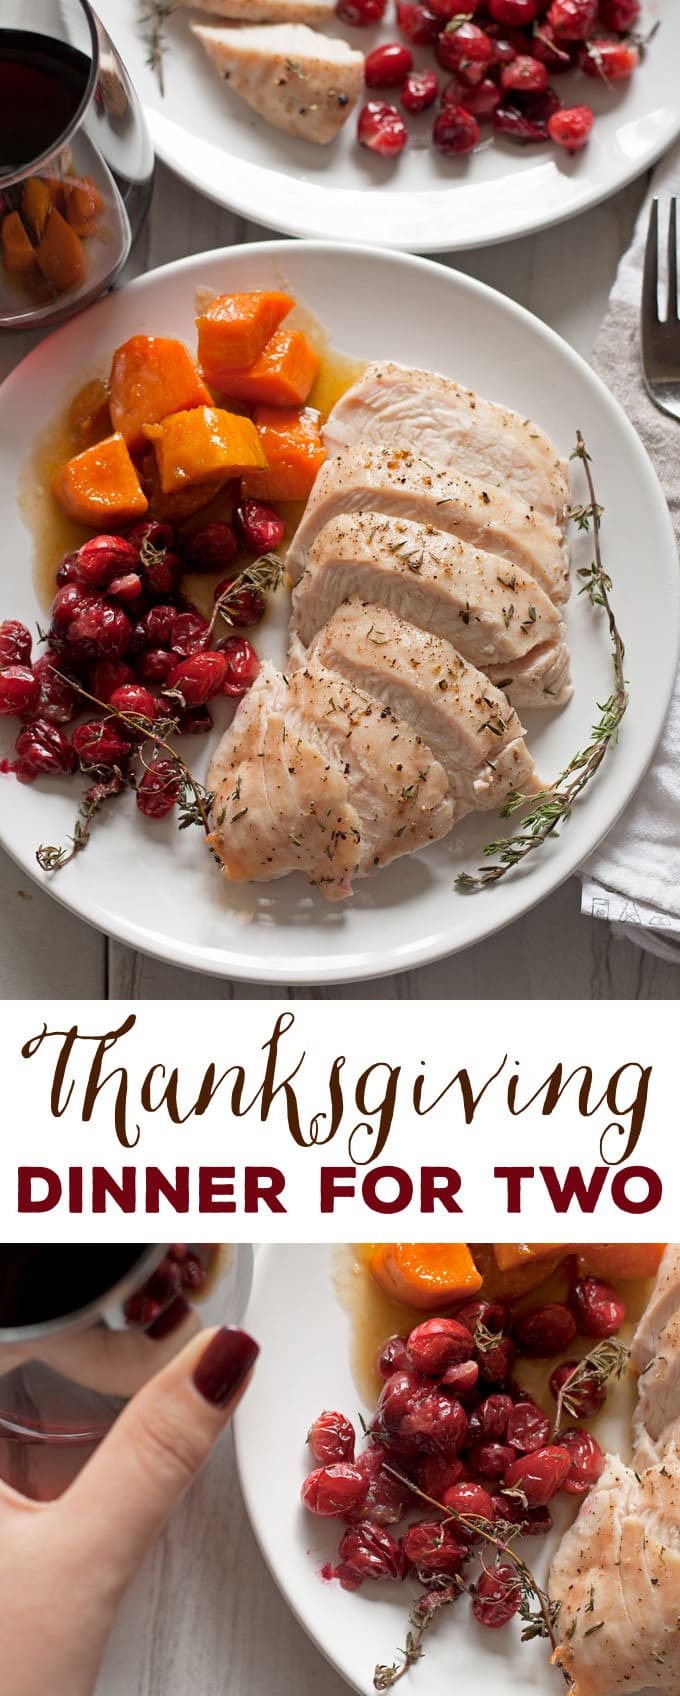 Thanksgiving Dinner For 2
 Thanksgiving Dinner for Two Turkey Breast Dinner for Two